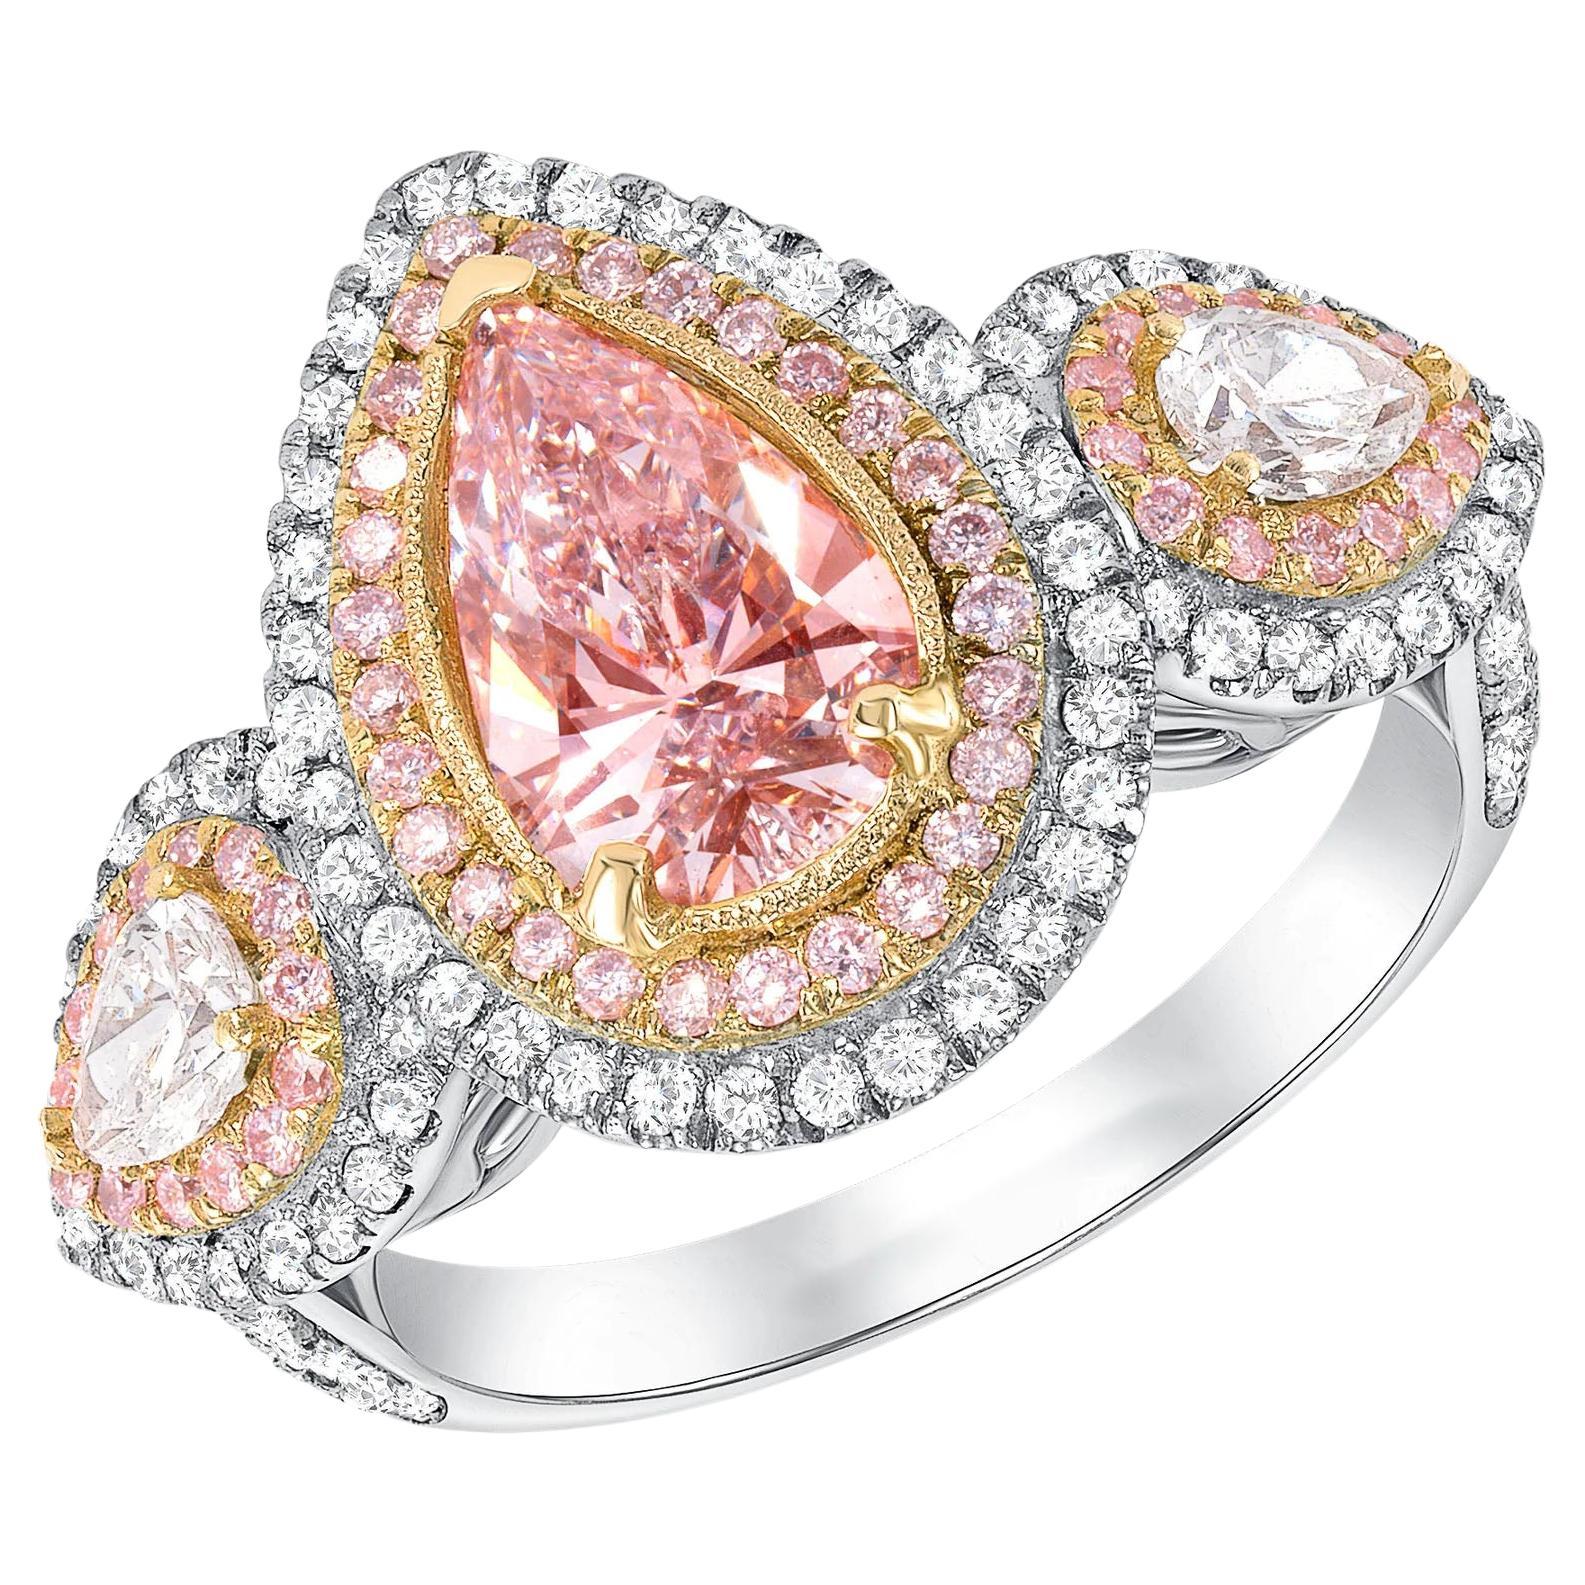 For Sale:  Helena's Pink Pear Shaped Halo Engagement Ring